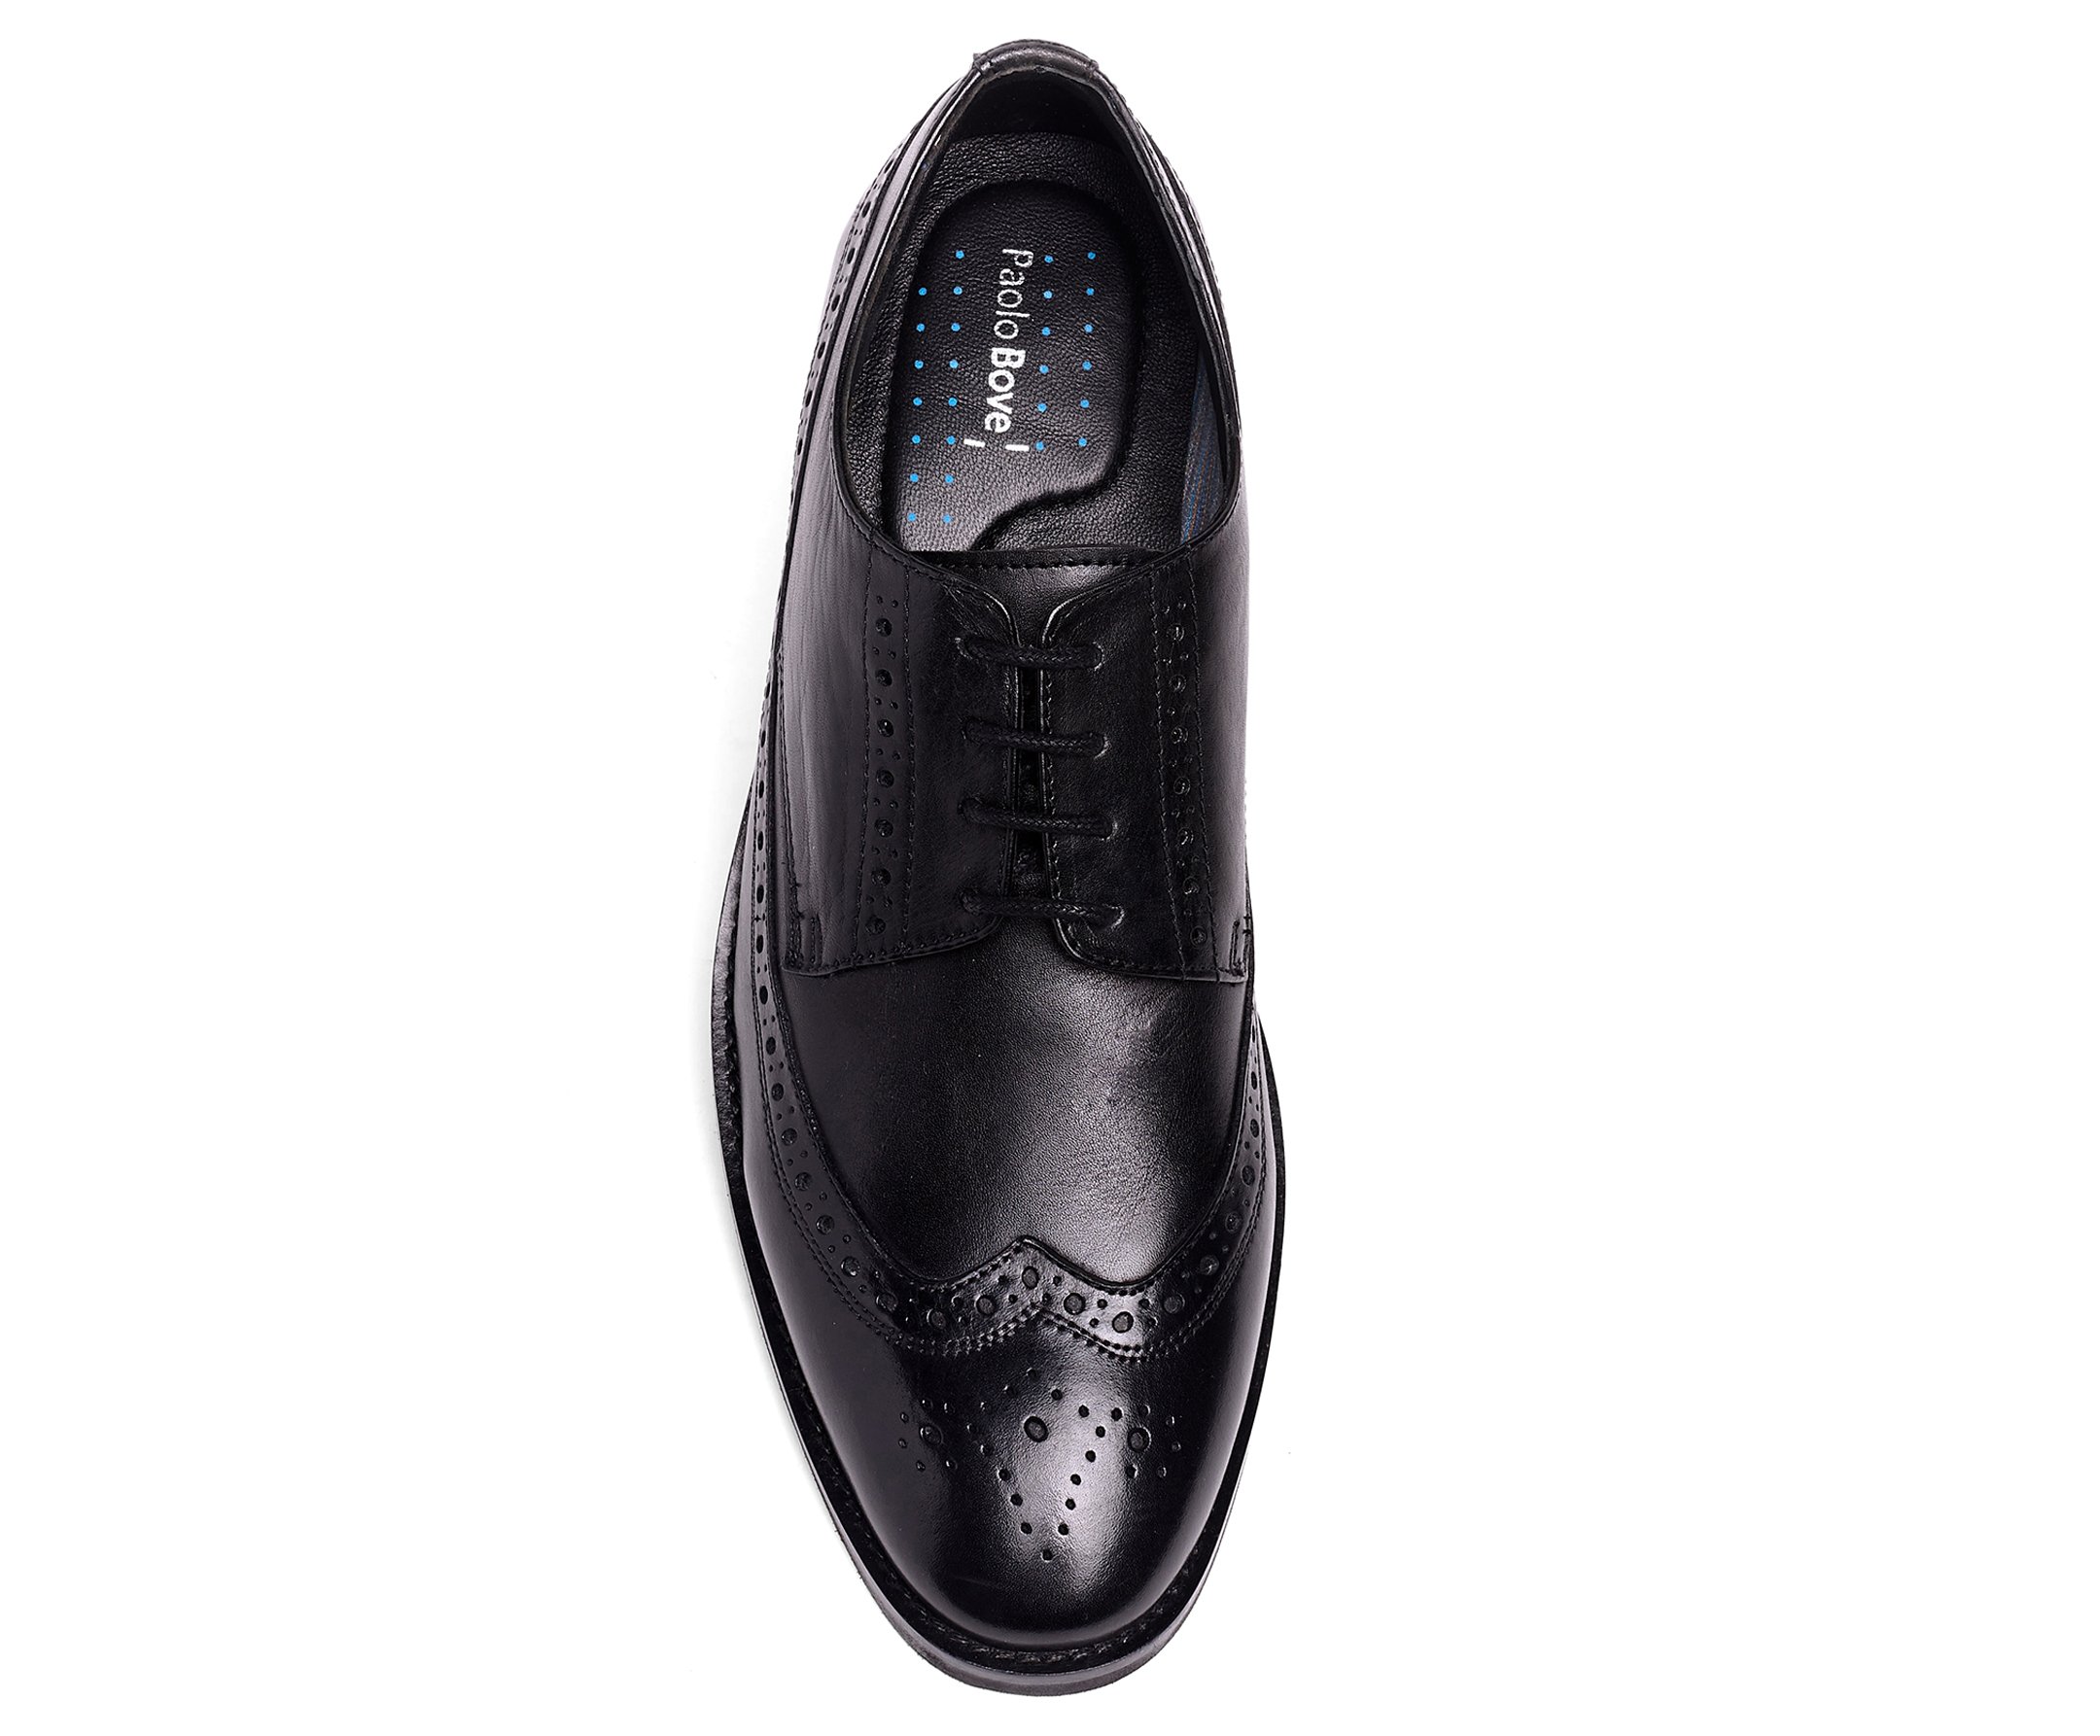 Paolo Bove Florenza Men's Wingtip Oxford - image 3 of 5